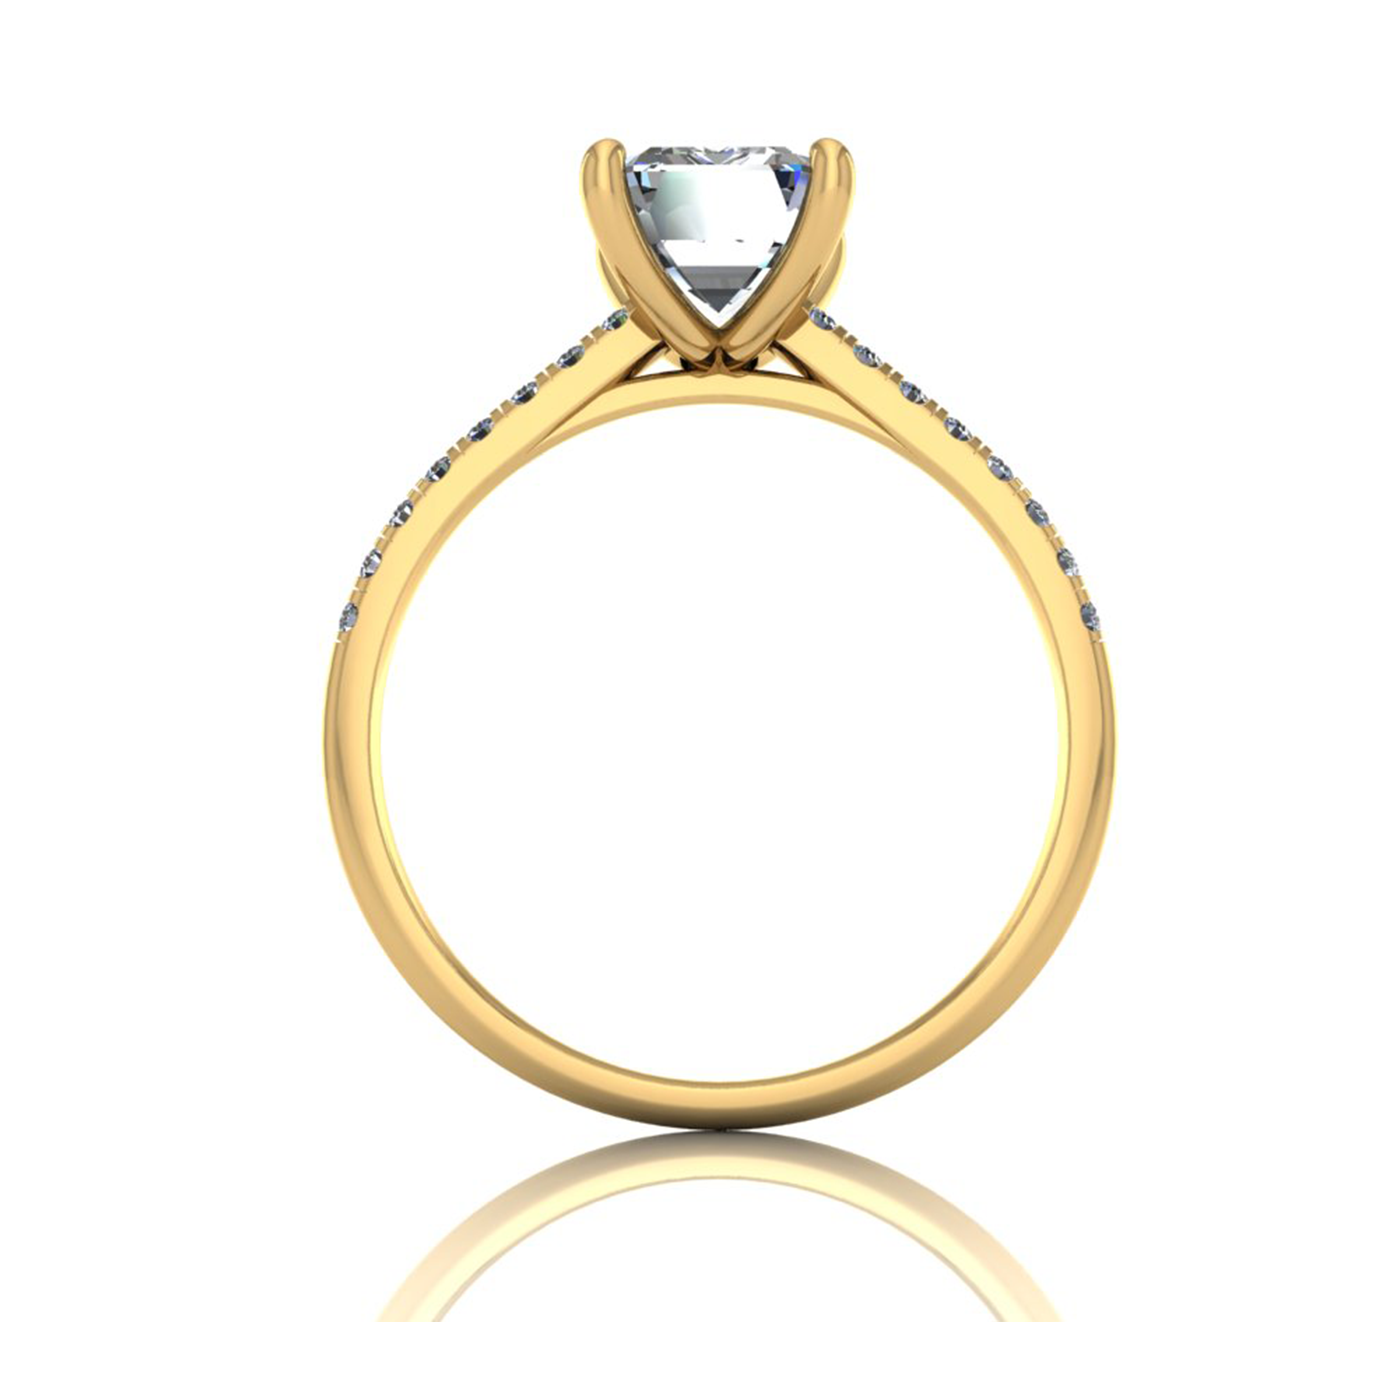 18k yellow gold 1.2ct 4 prongs emerald cut diamond engagement ring with whisper thin pavÉ set band